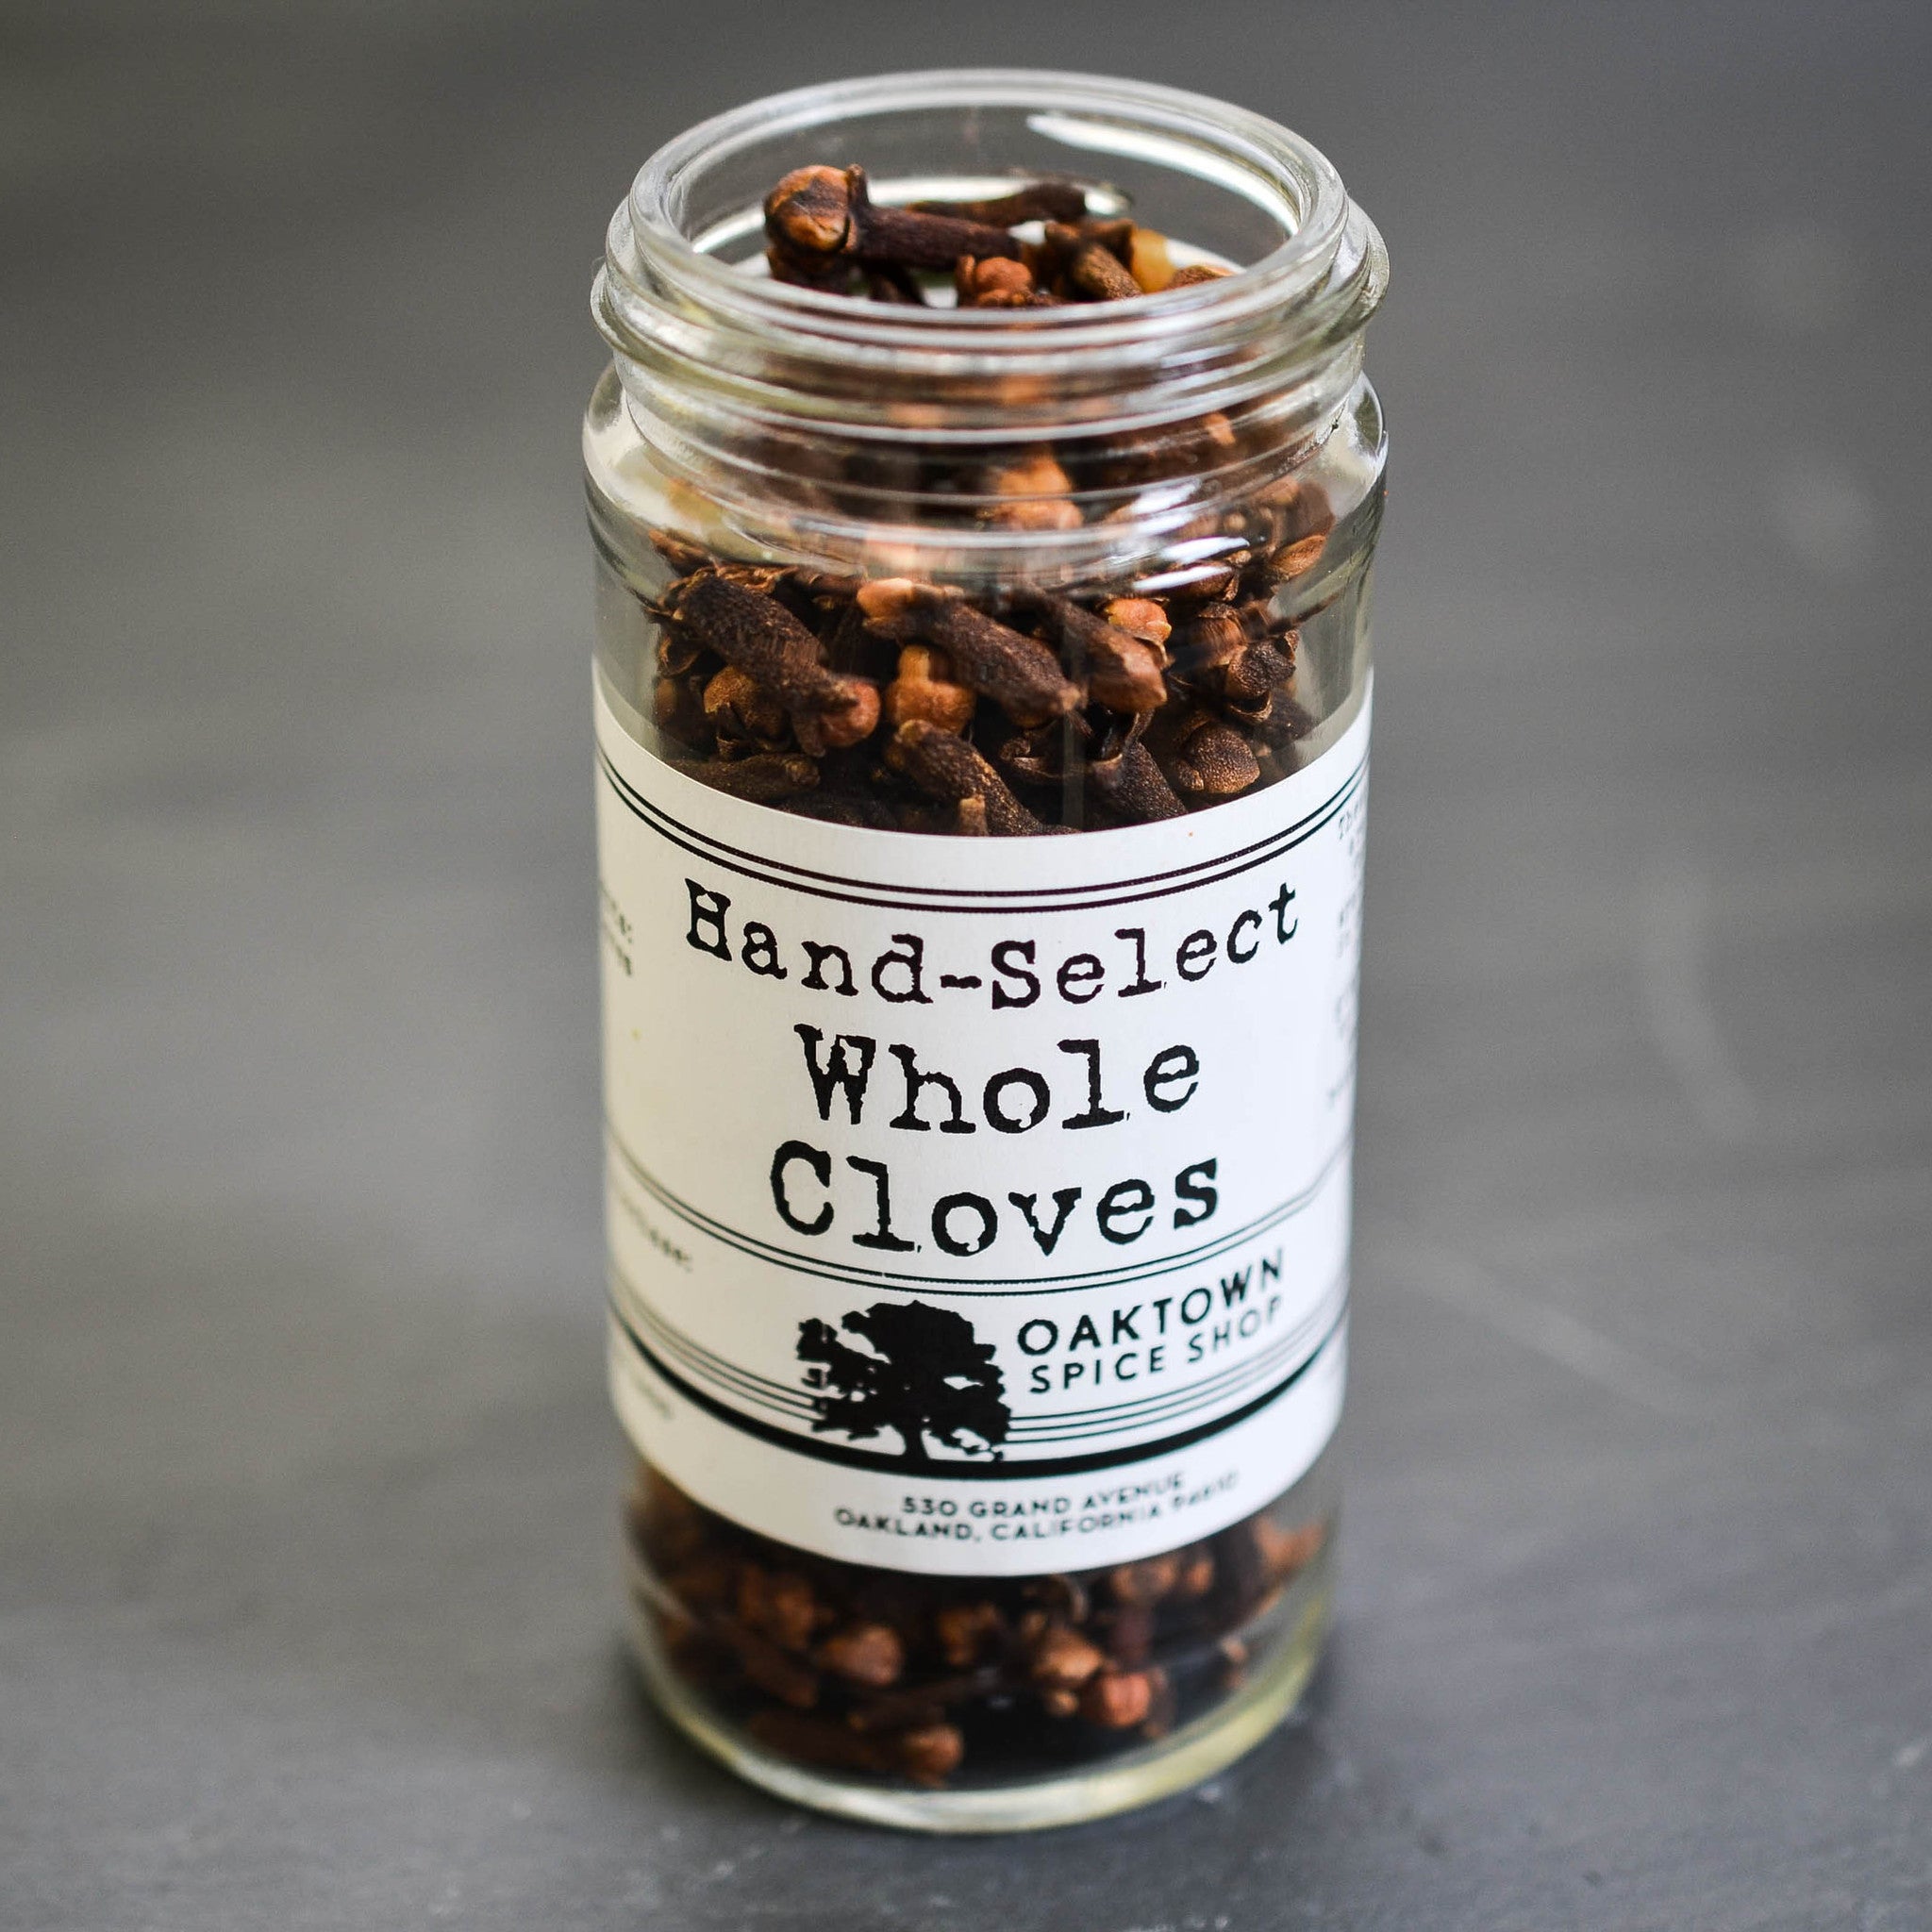 Whole Cloves Hand Selected by Oaktown Spice Shop